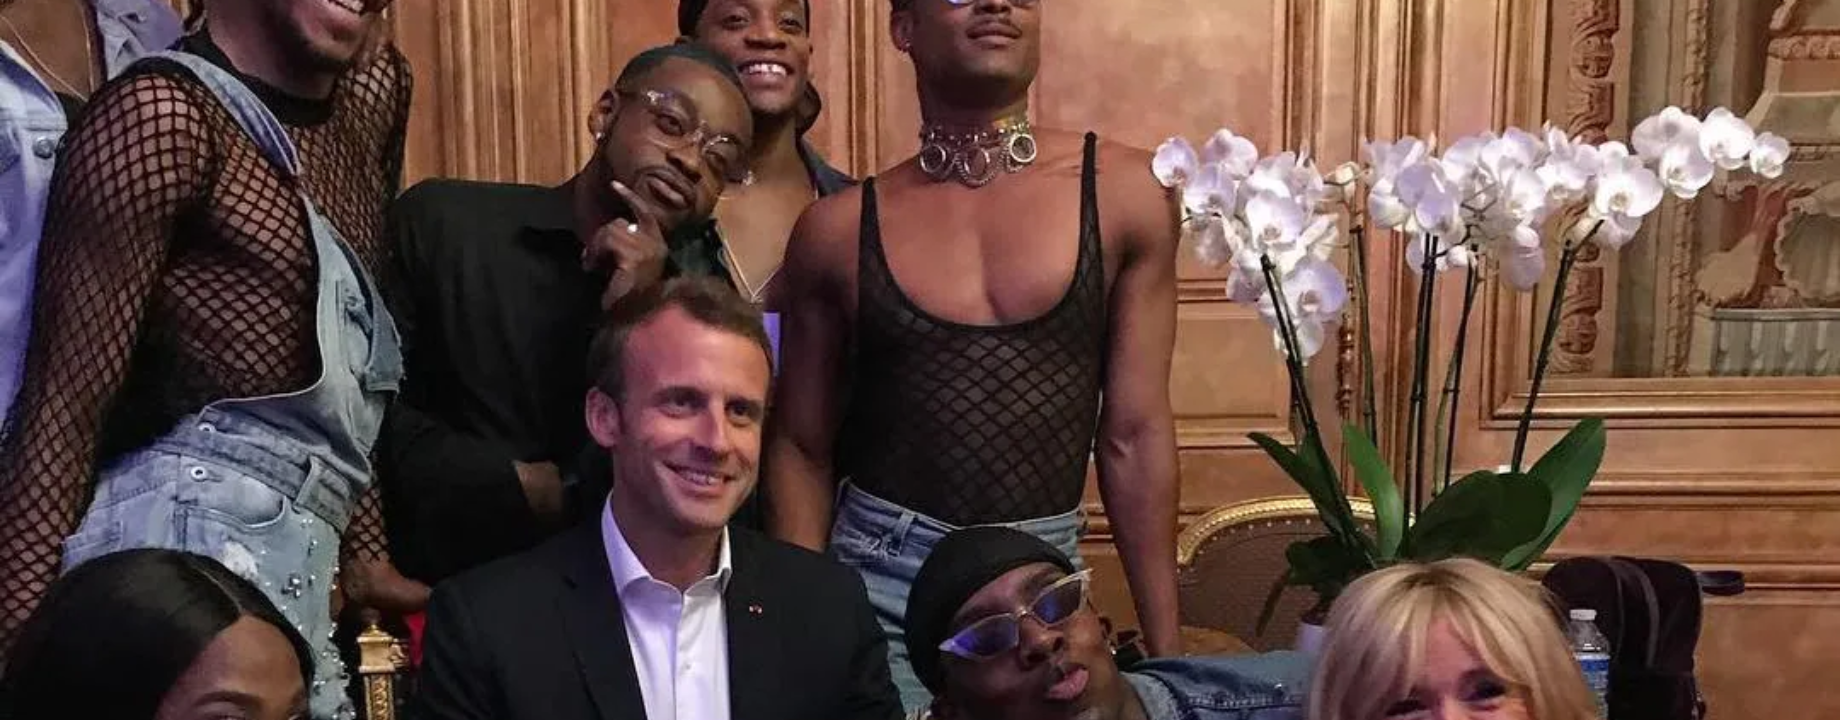 Emmanuel Macron and his wife Christine pose with LGBT dancers during an electronic music party provoking outrage among Frances Rightwingers Credit Pierre Olivier Costa via Instagram